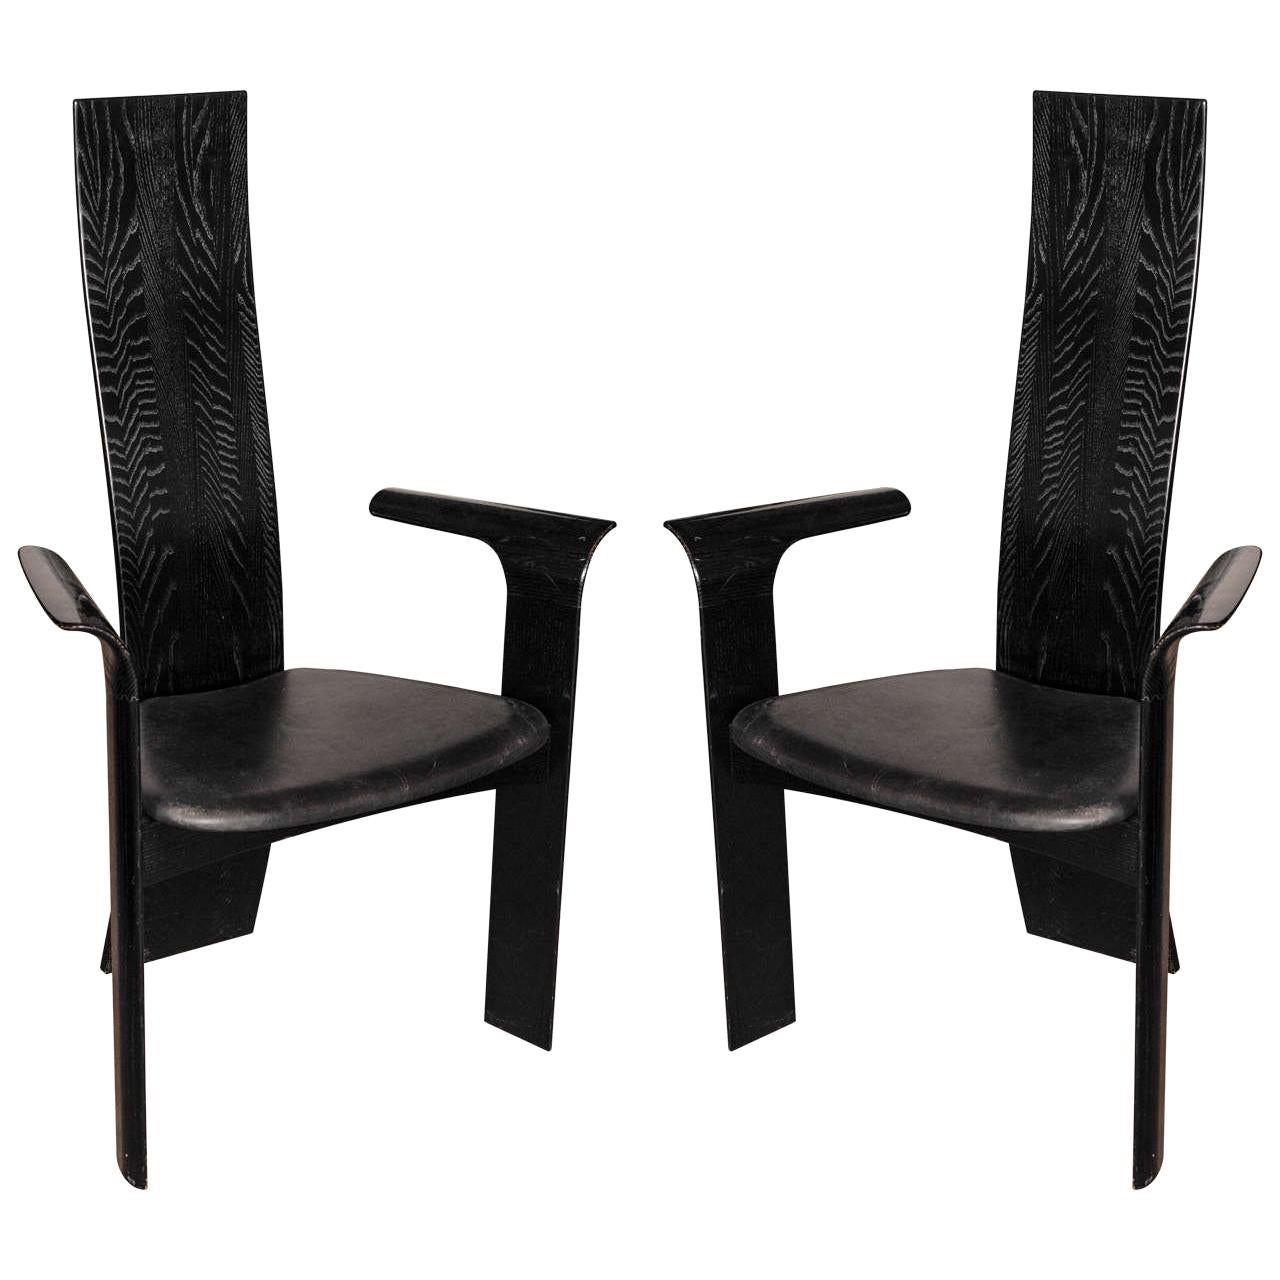 Tranekaer Dining Chairs Type "Iris", 6 Available For Sale